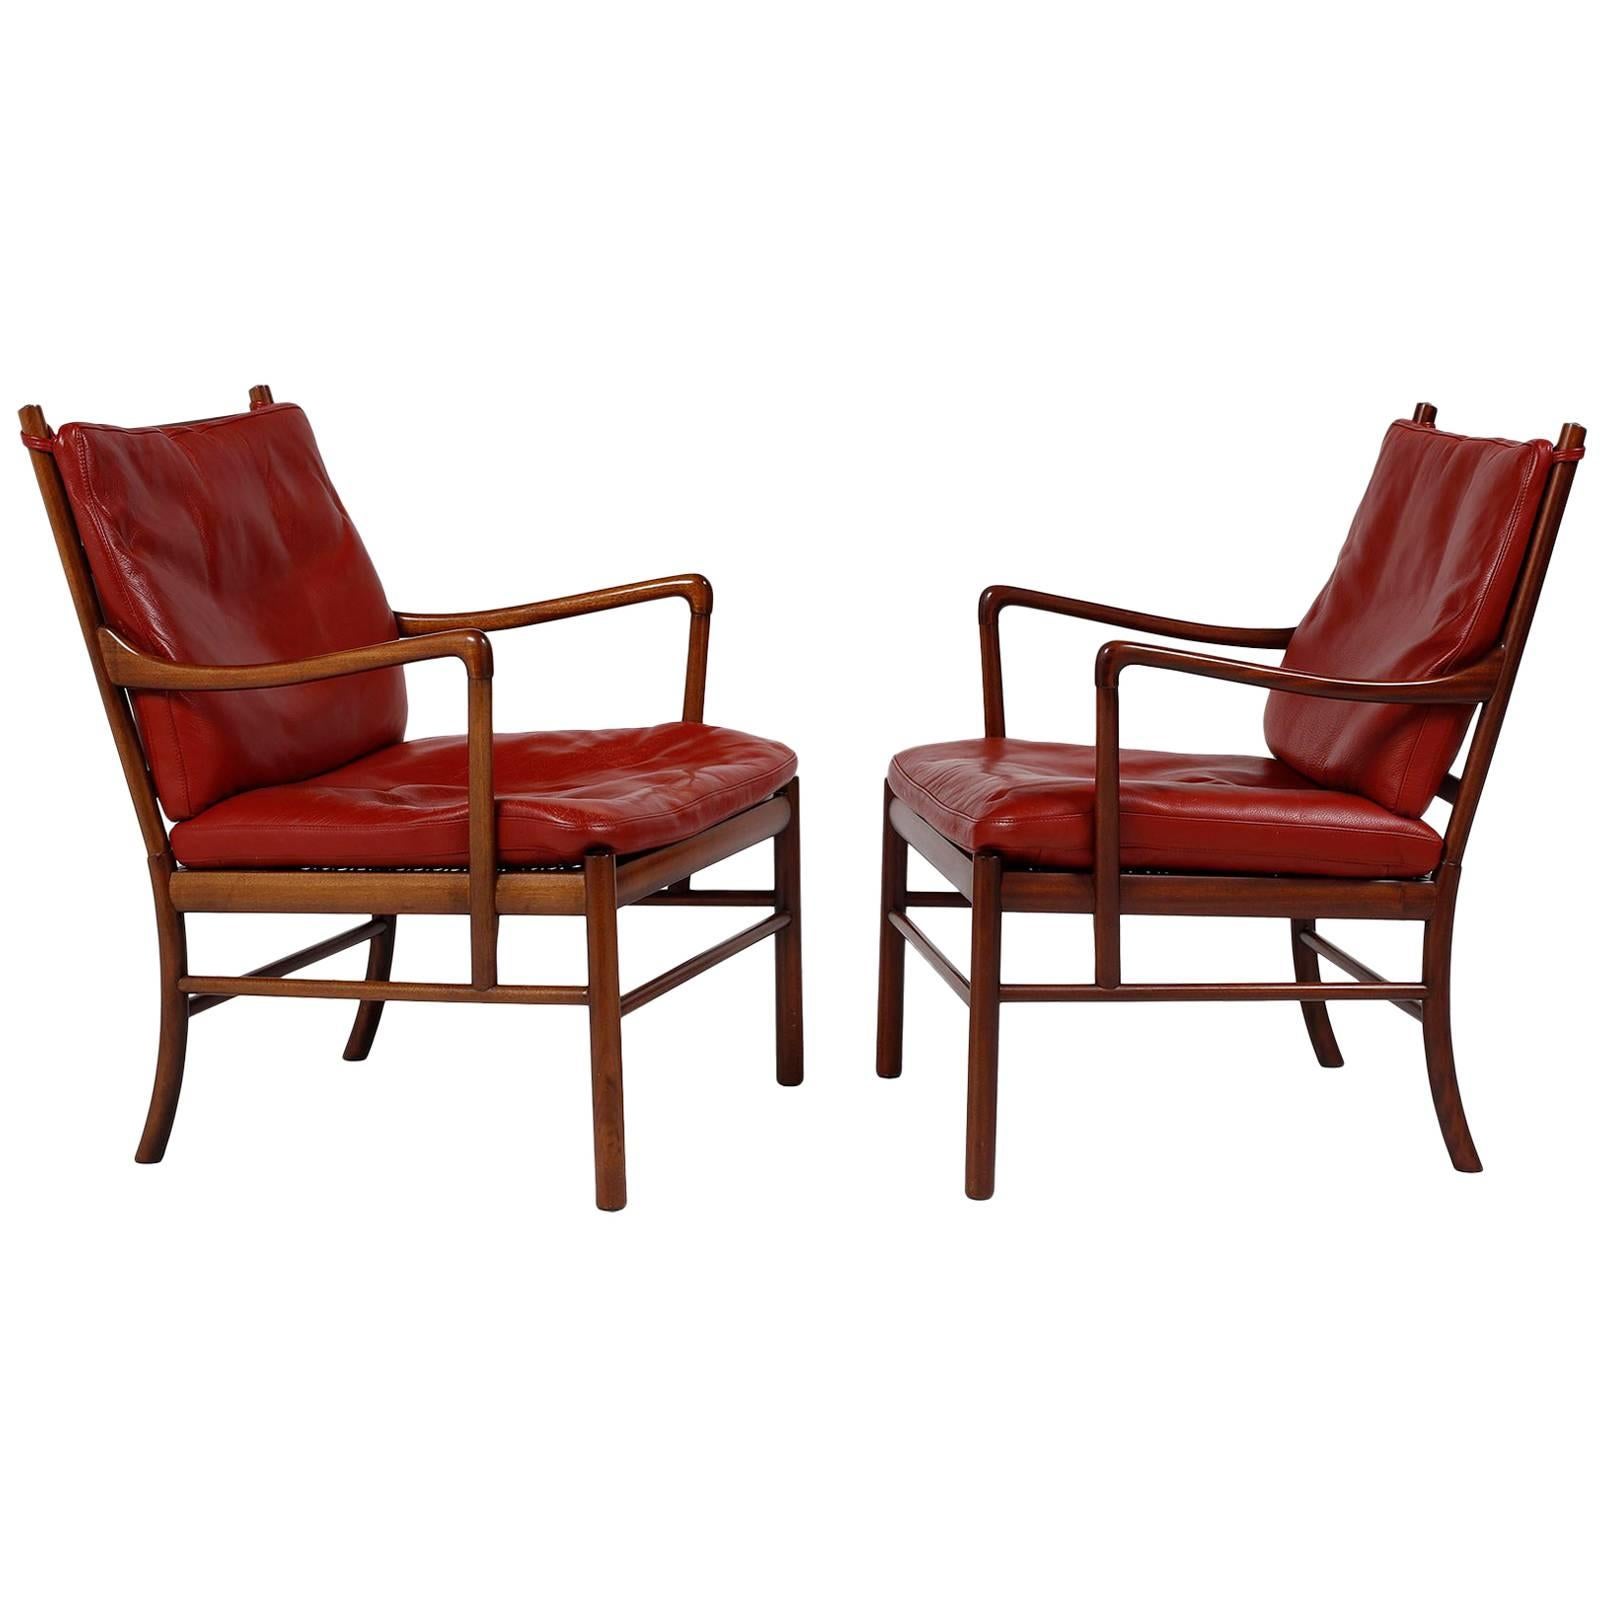 Ole Wanscher Pair of 'Colonial' Armchairs in Red Leather